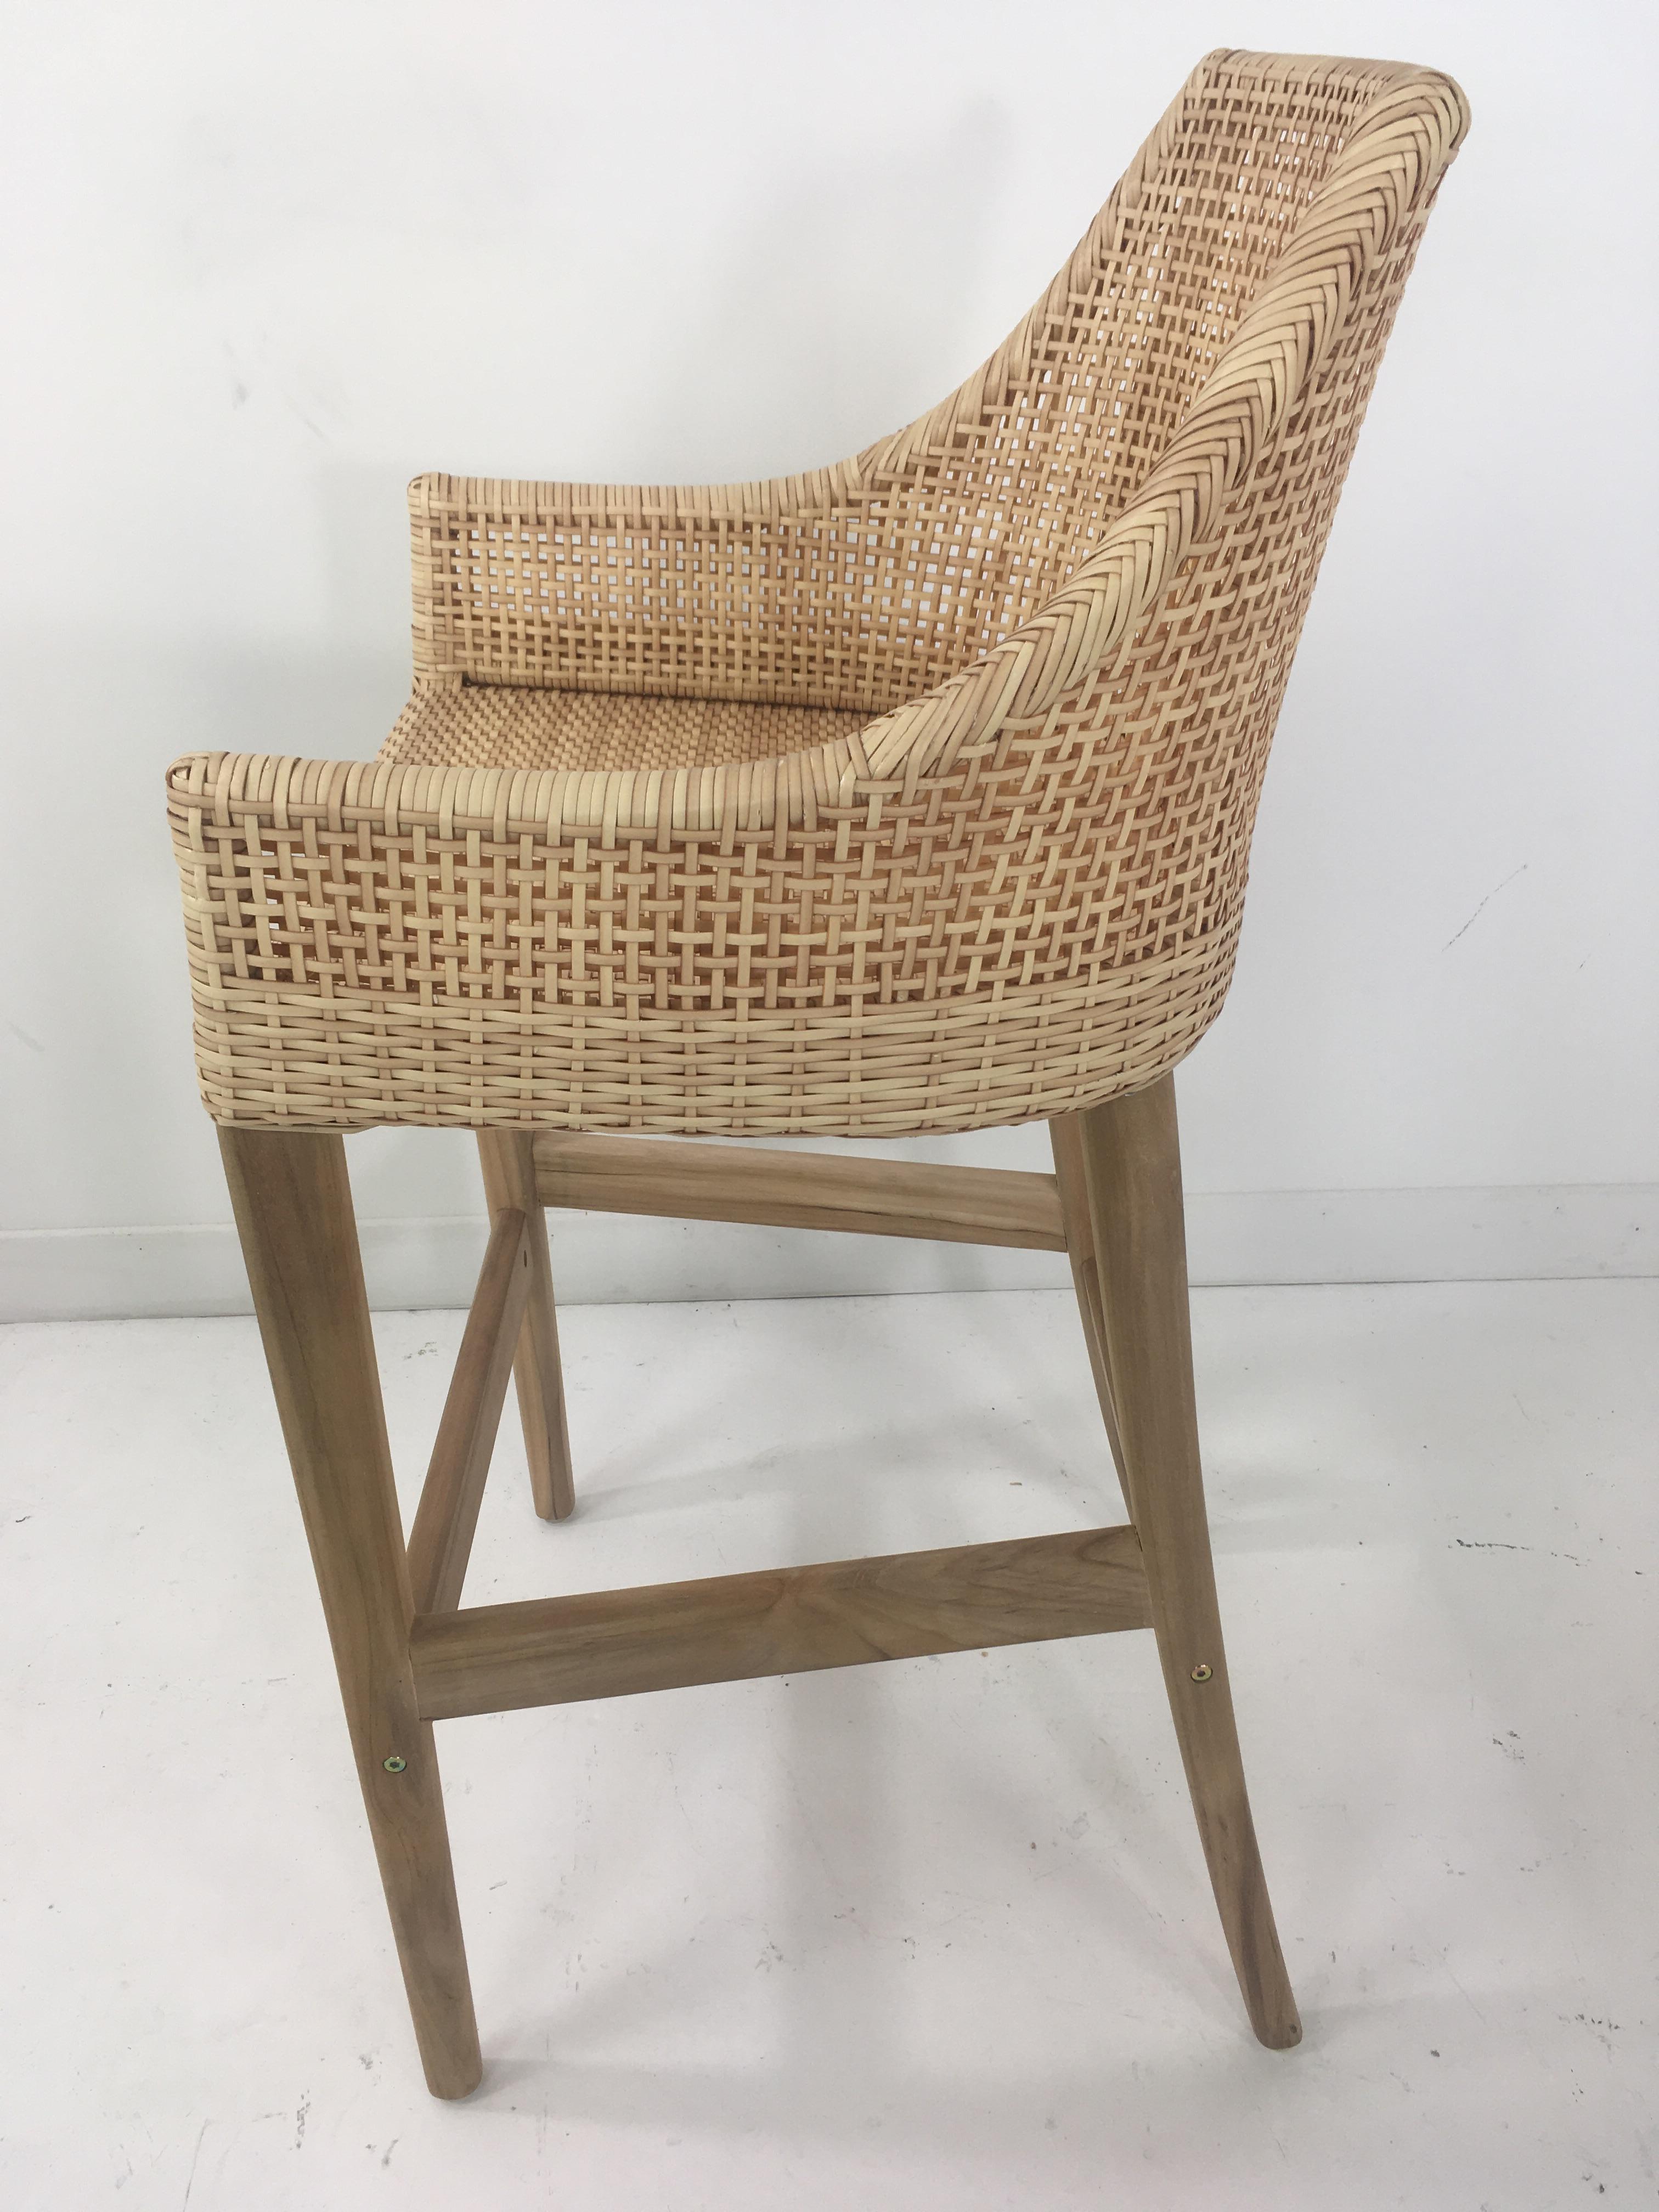 Teak Wooden and Braided Resin Rattan Effect Outdoor Bar Stool For Sale 6